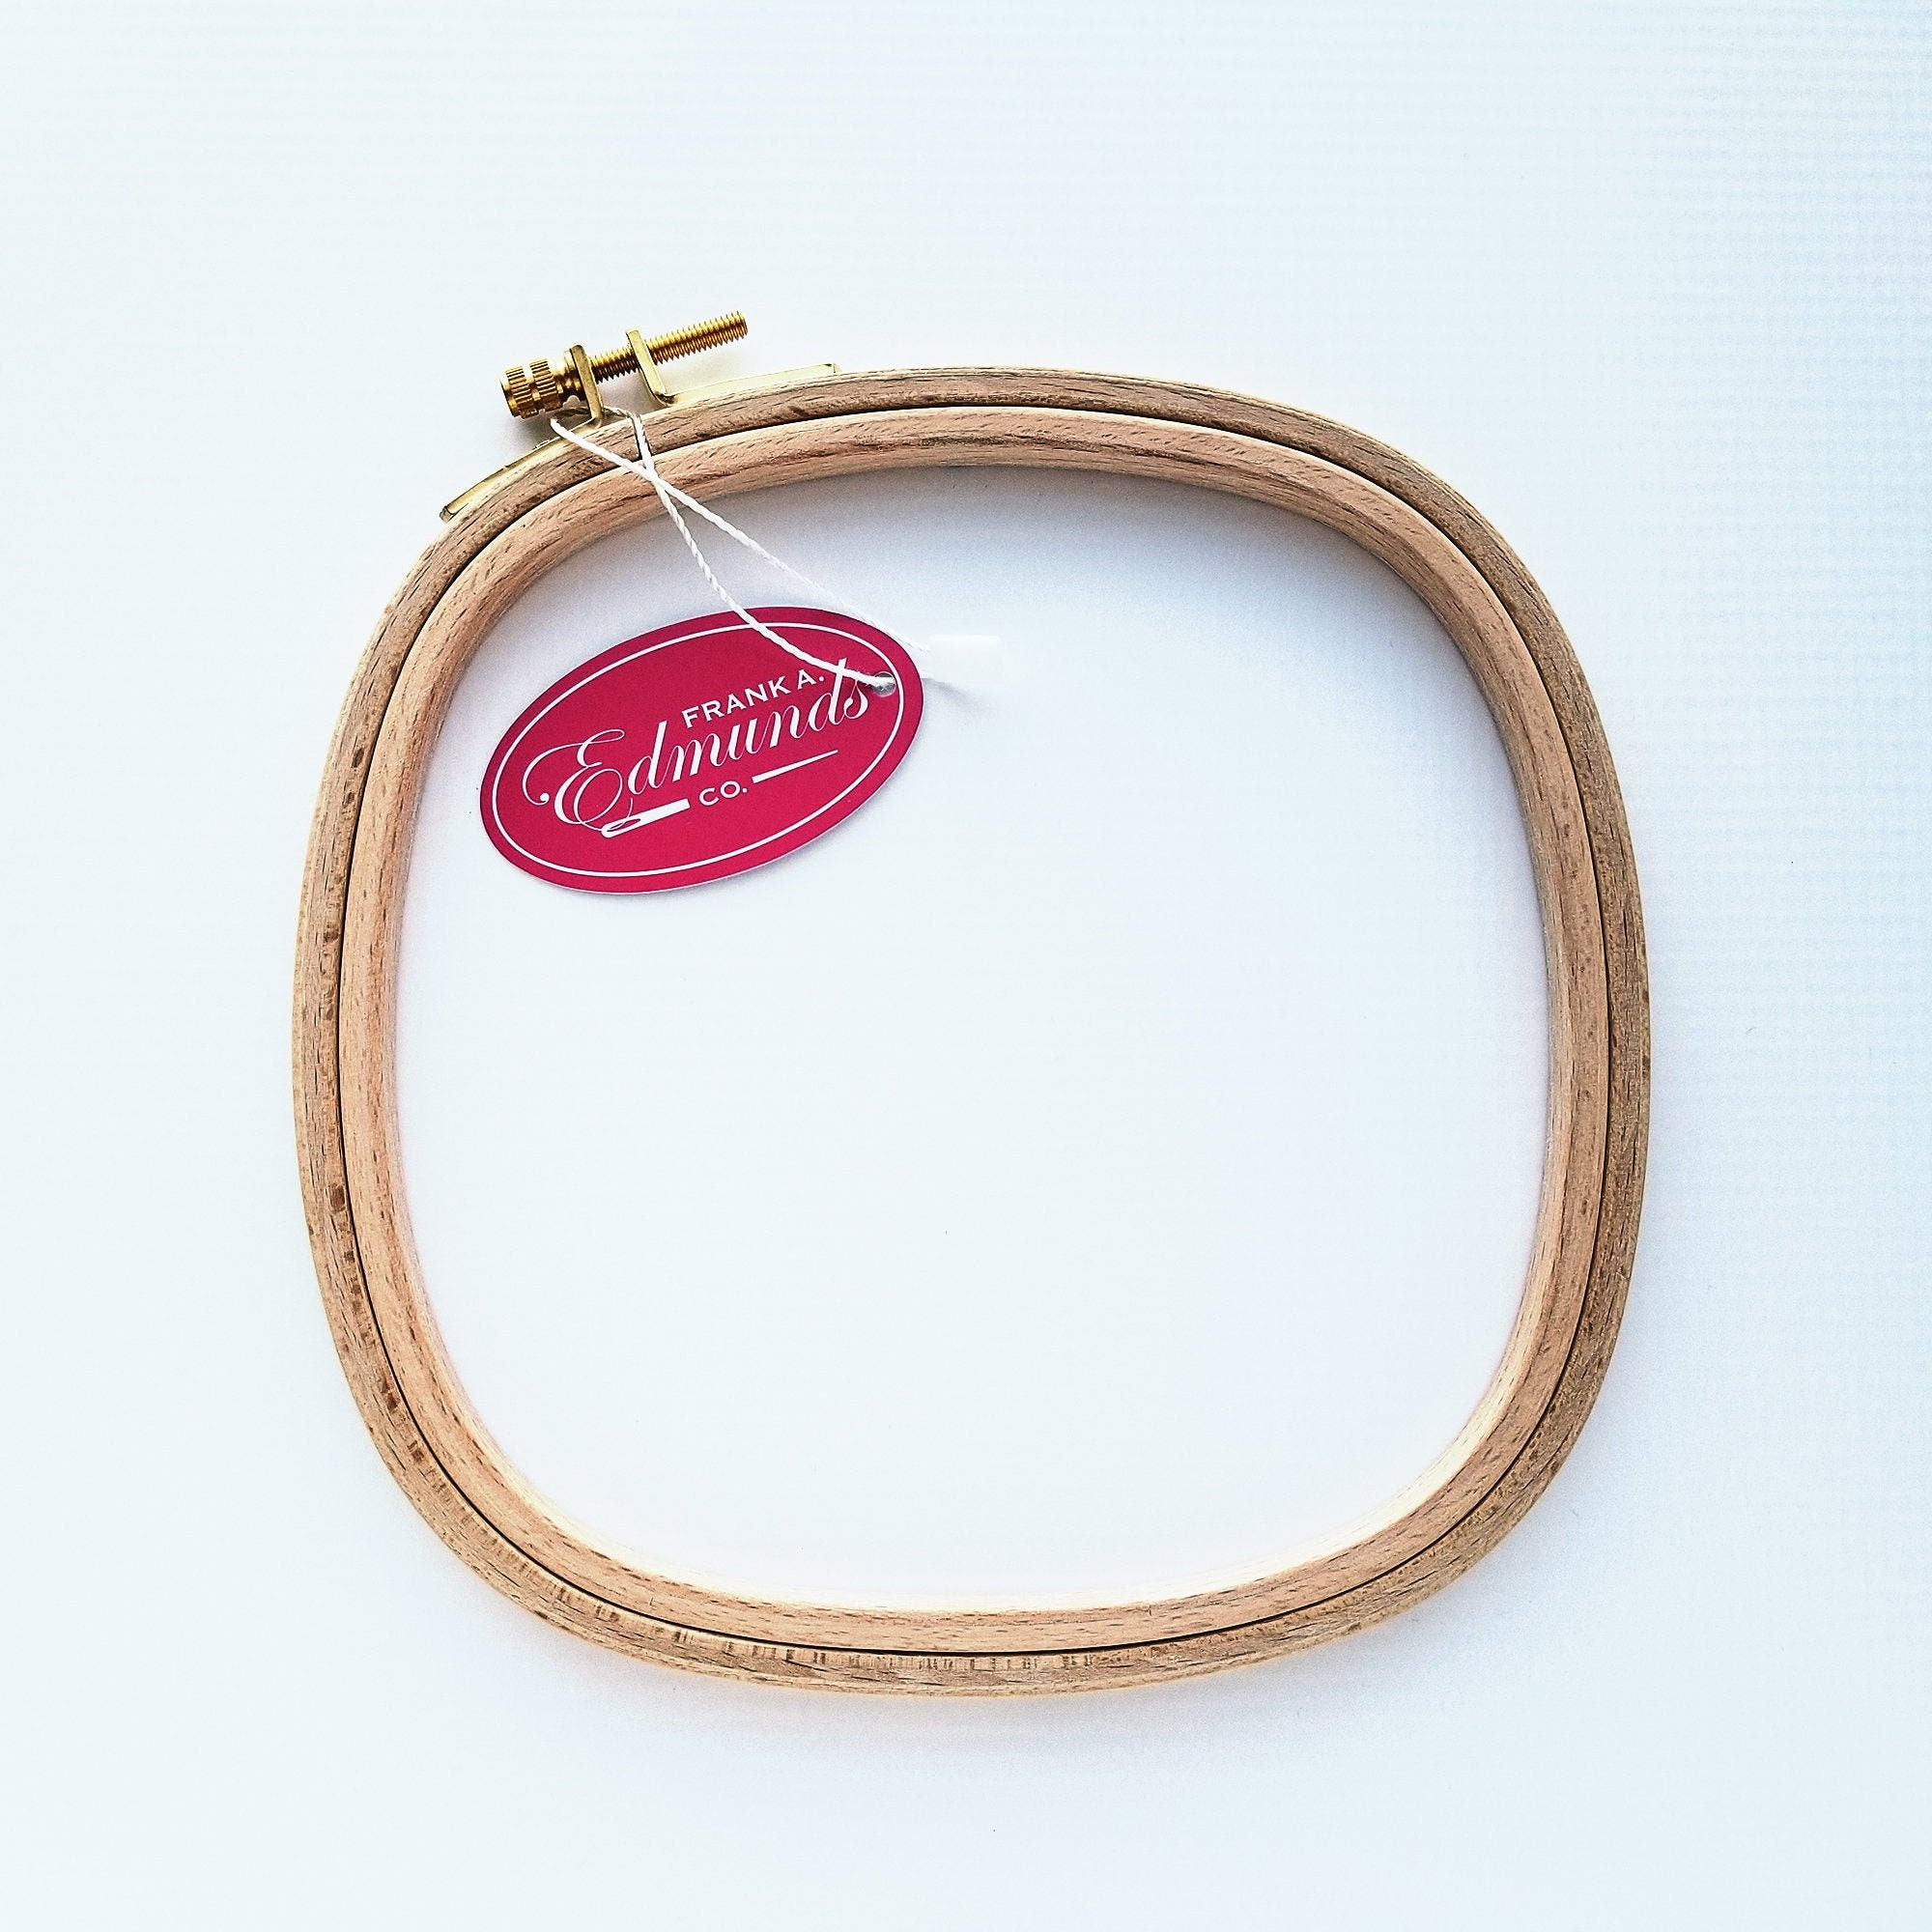 Wood Hand Embroidery Hoop for Needlework and Cross Stitch, Hoop